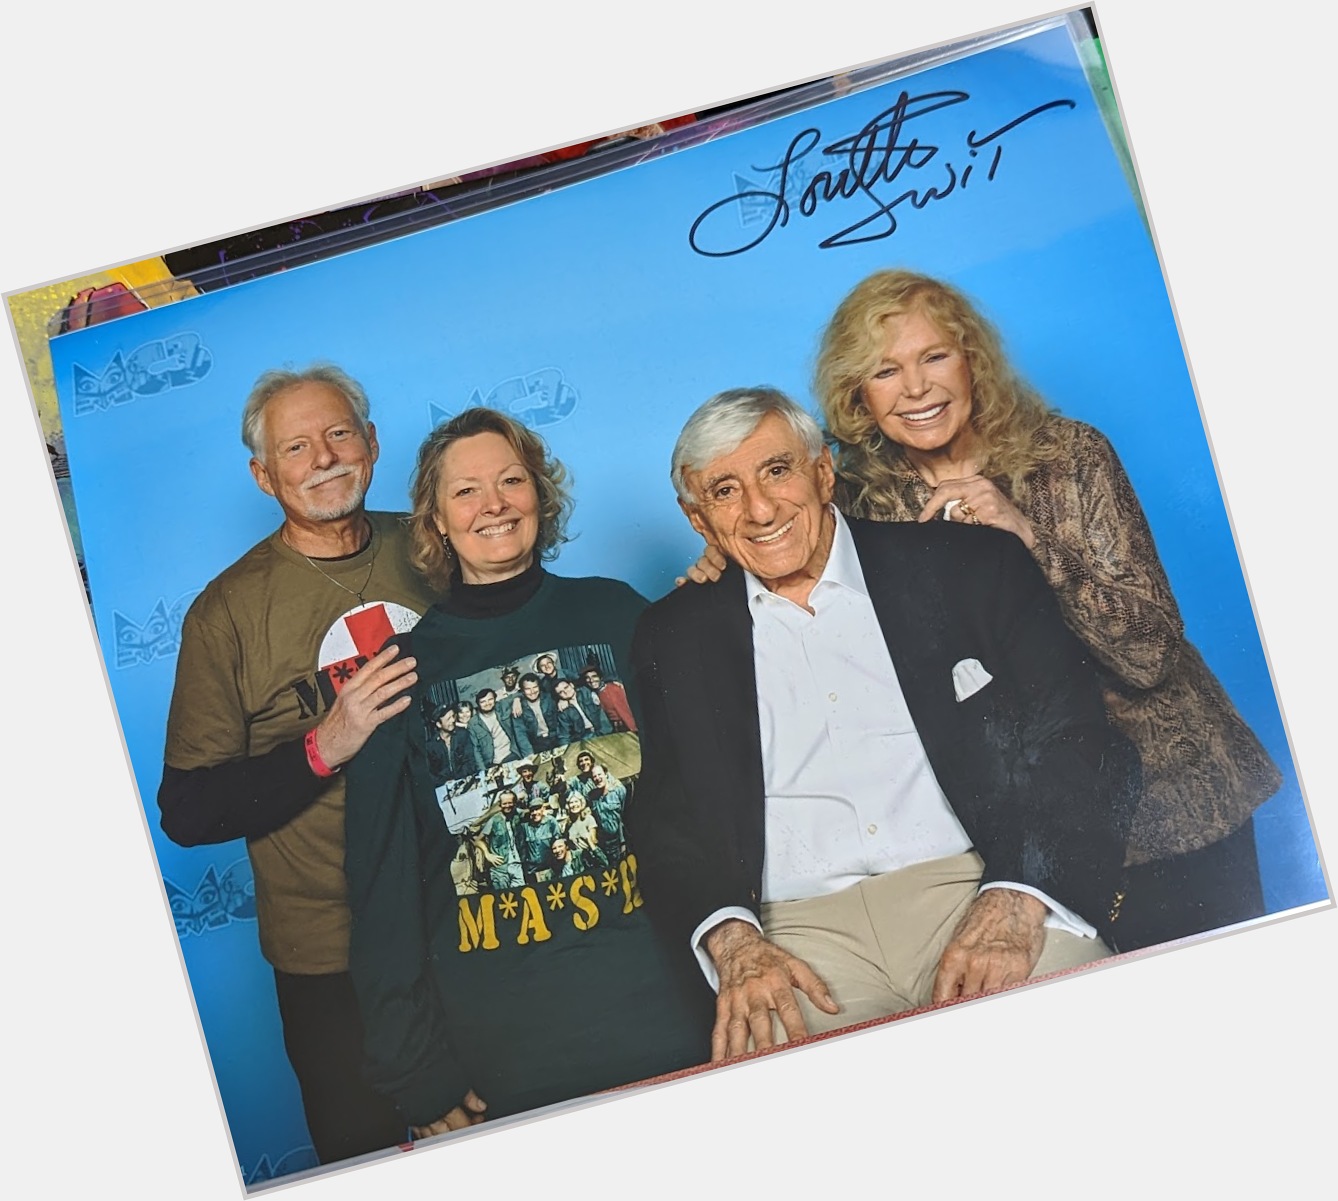   Happy Birthday Loretta!! I was great to meet you and Jamie Farr in Michigan last month. 